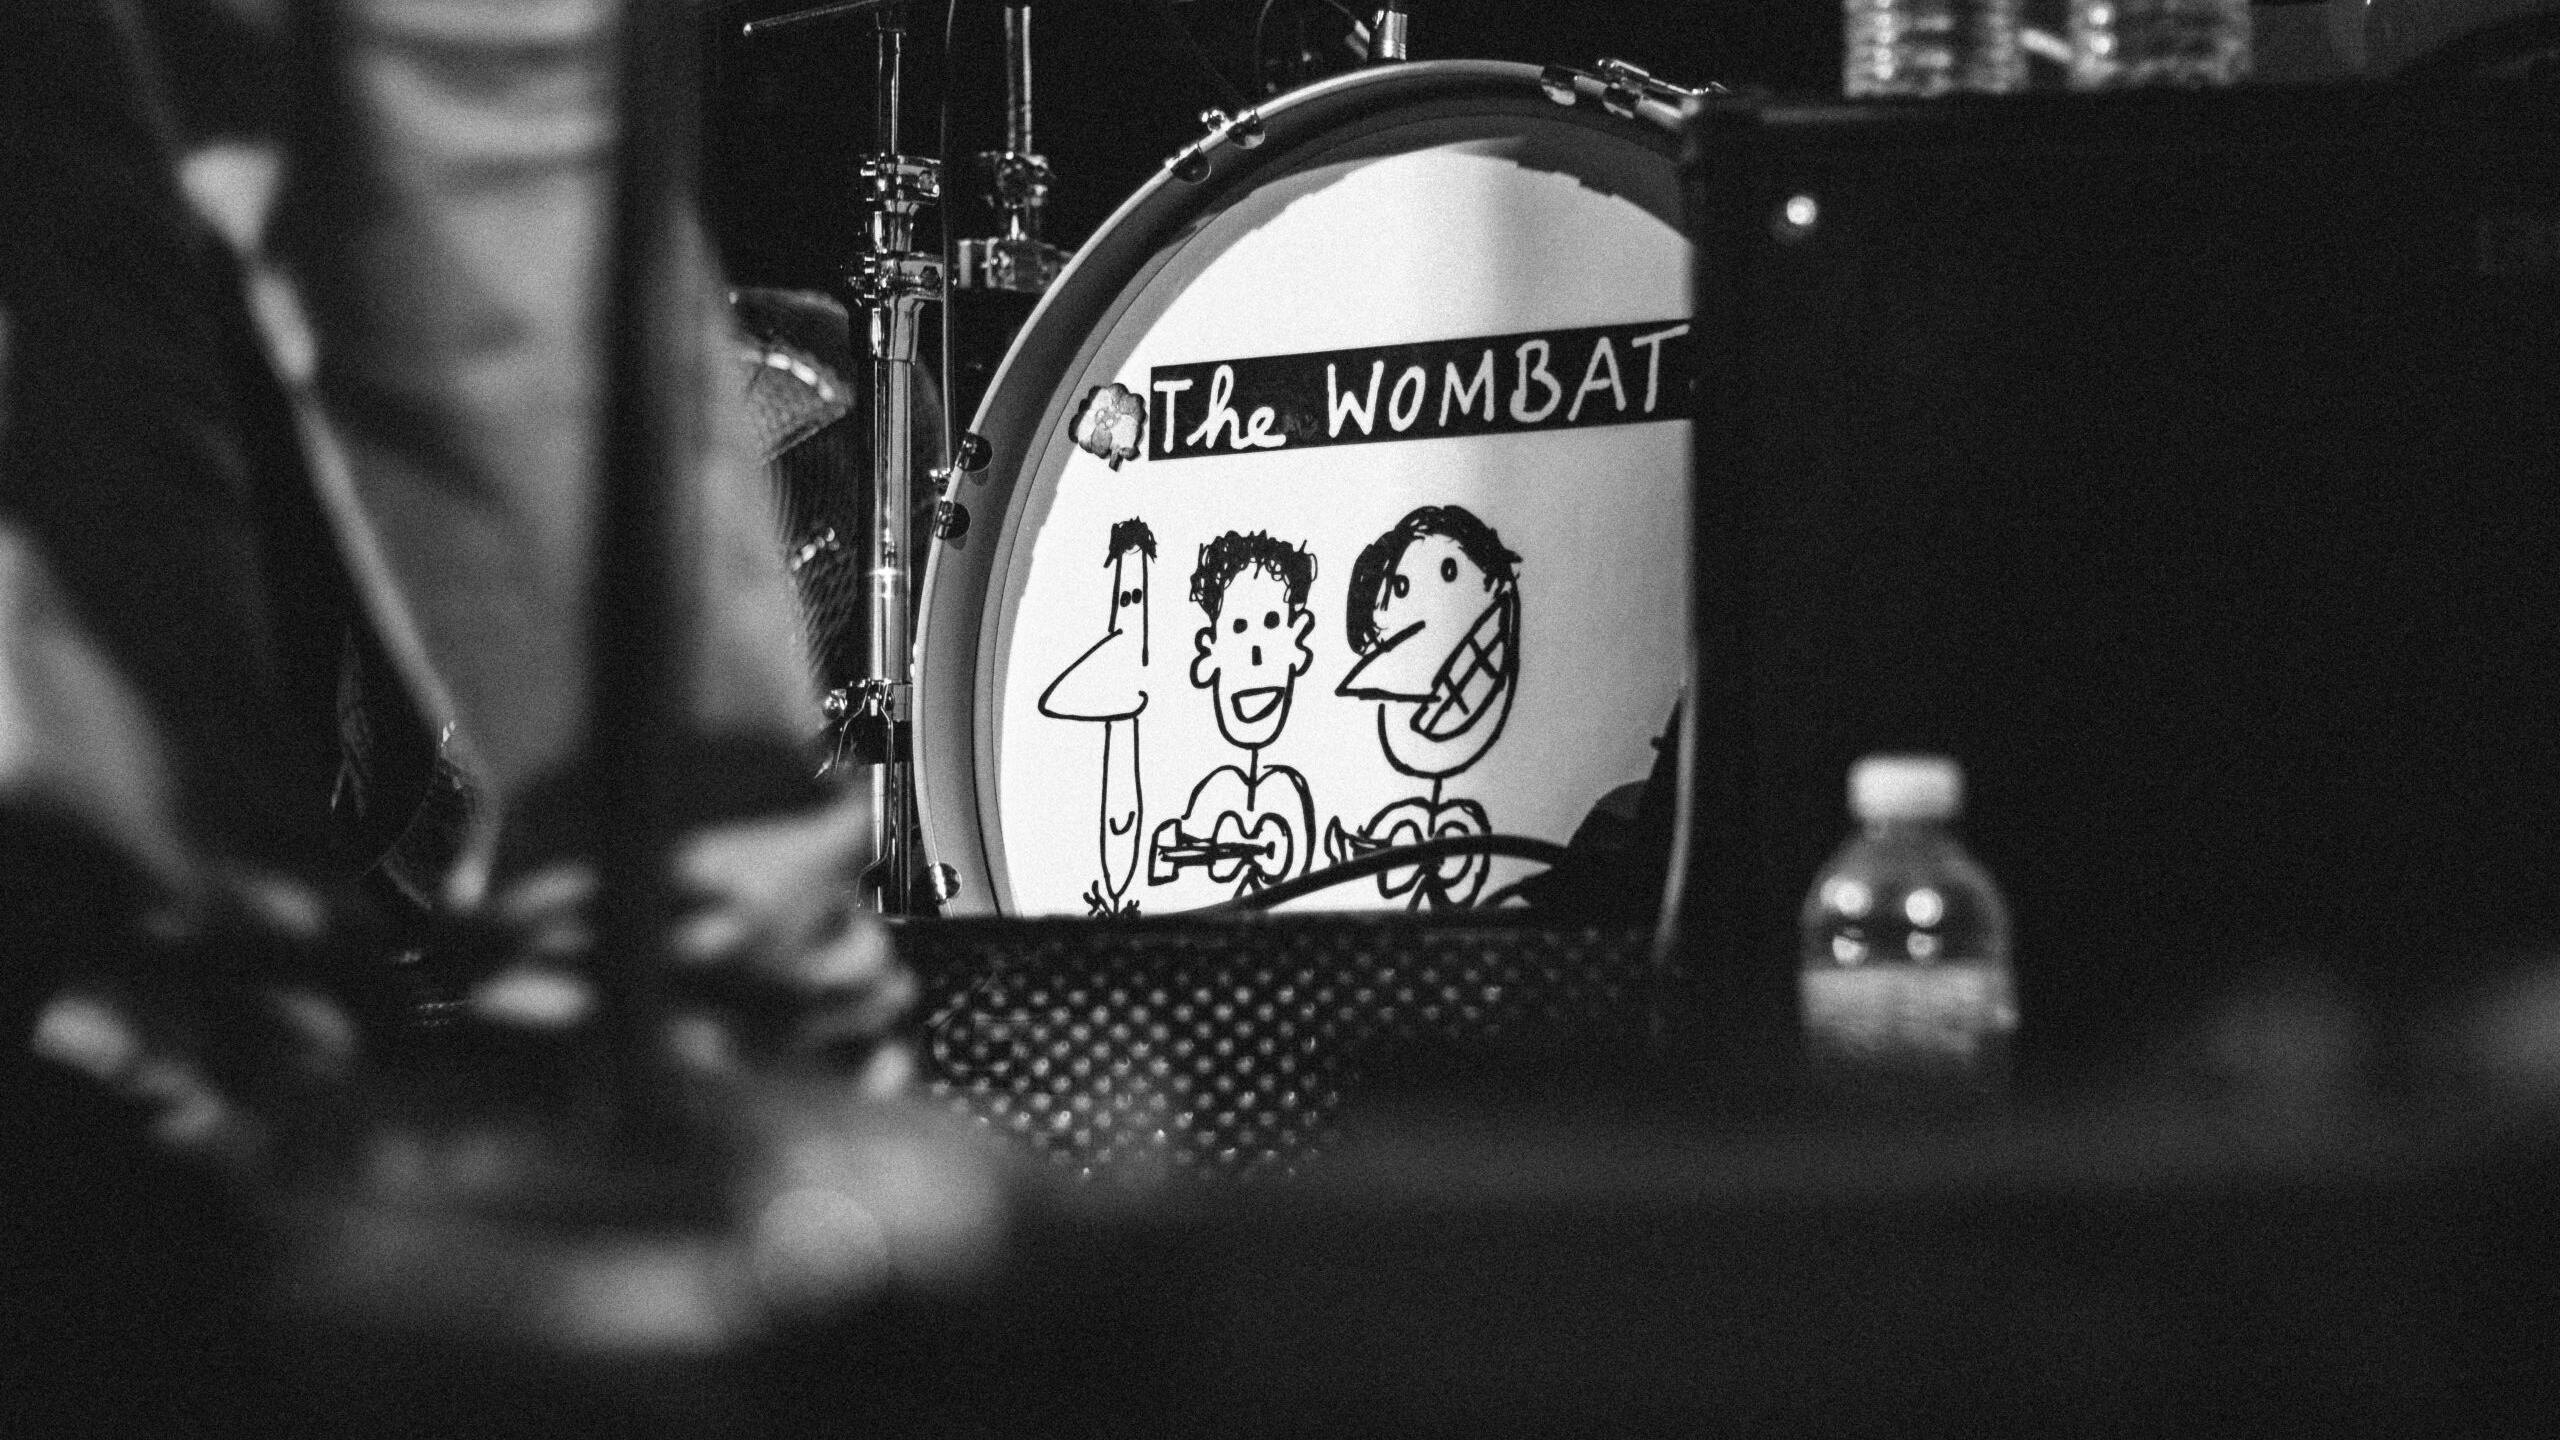 arts club reopens: the wombats